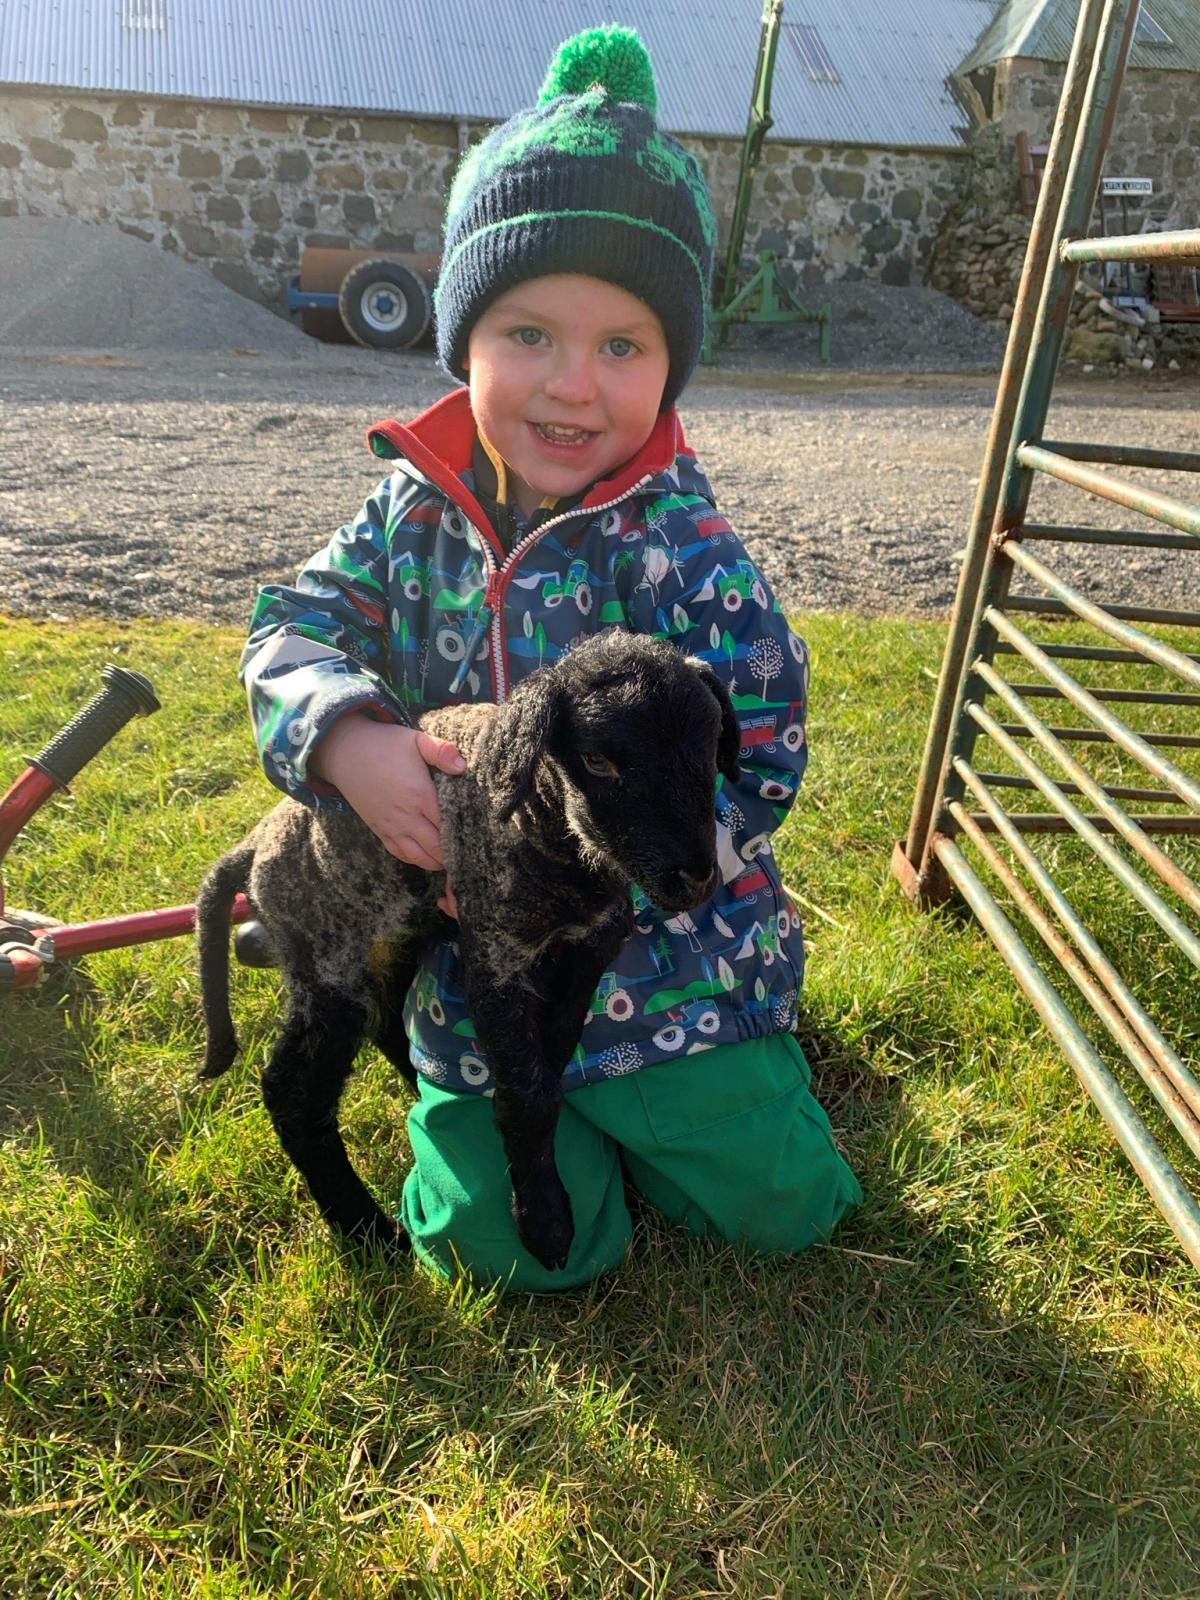 Claire Notman - “Lambing time is the best time” George Grant, Insch